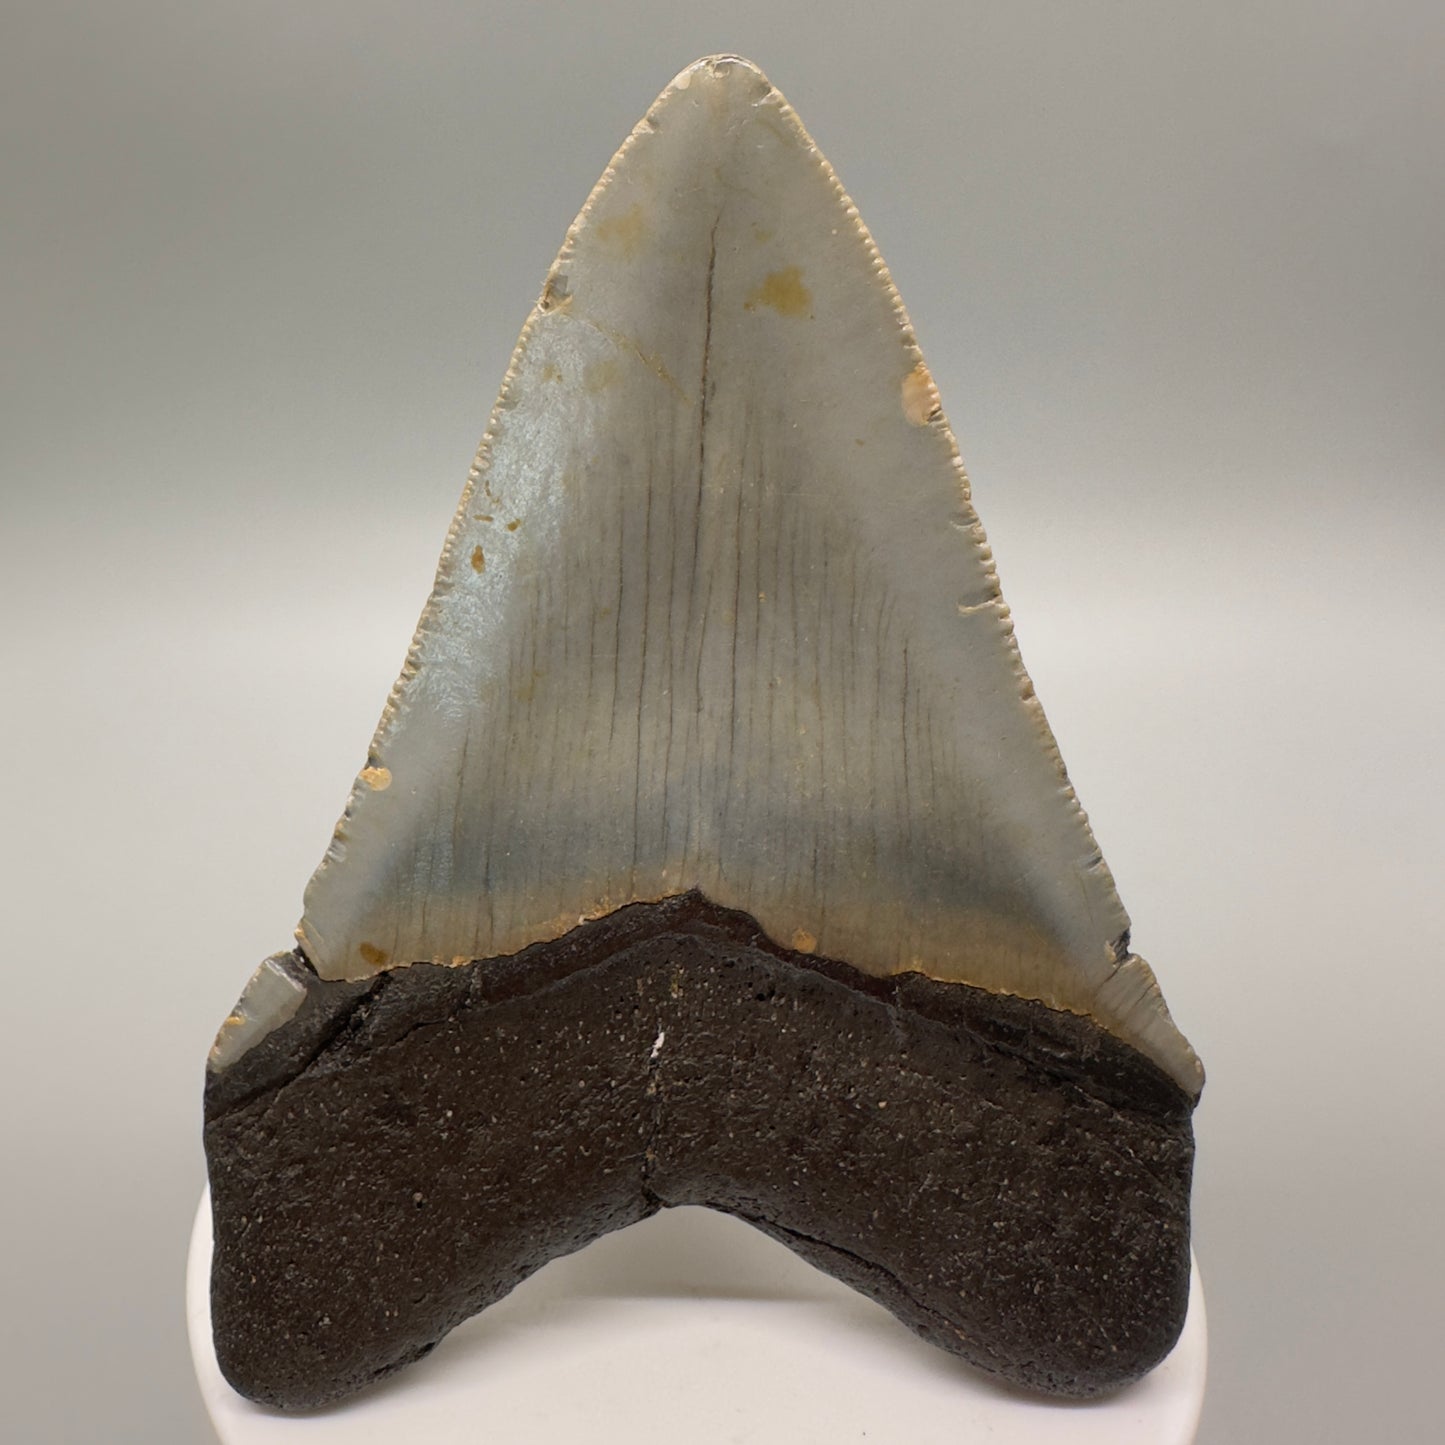 North Carolina Diving Discovery: Colorful 3.47" Fossil Megalodon Shark Tooth CM4614 - Back